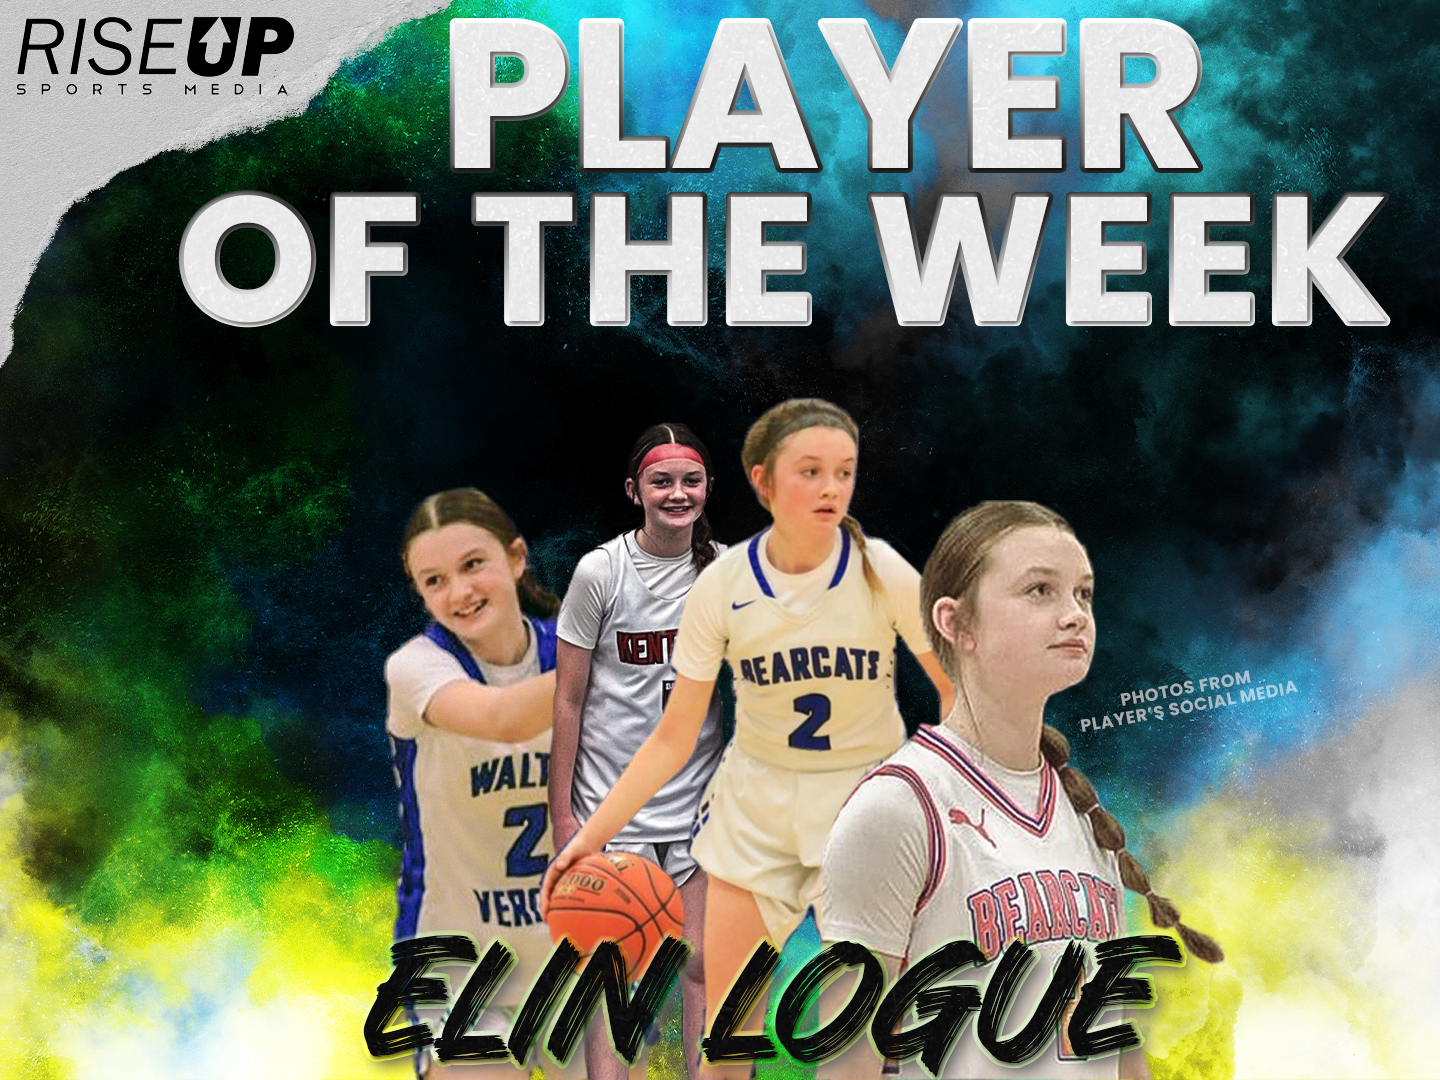 Rise Up Player of the Week: Elin Logue